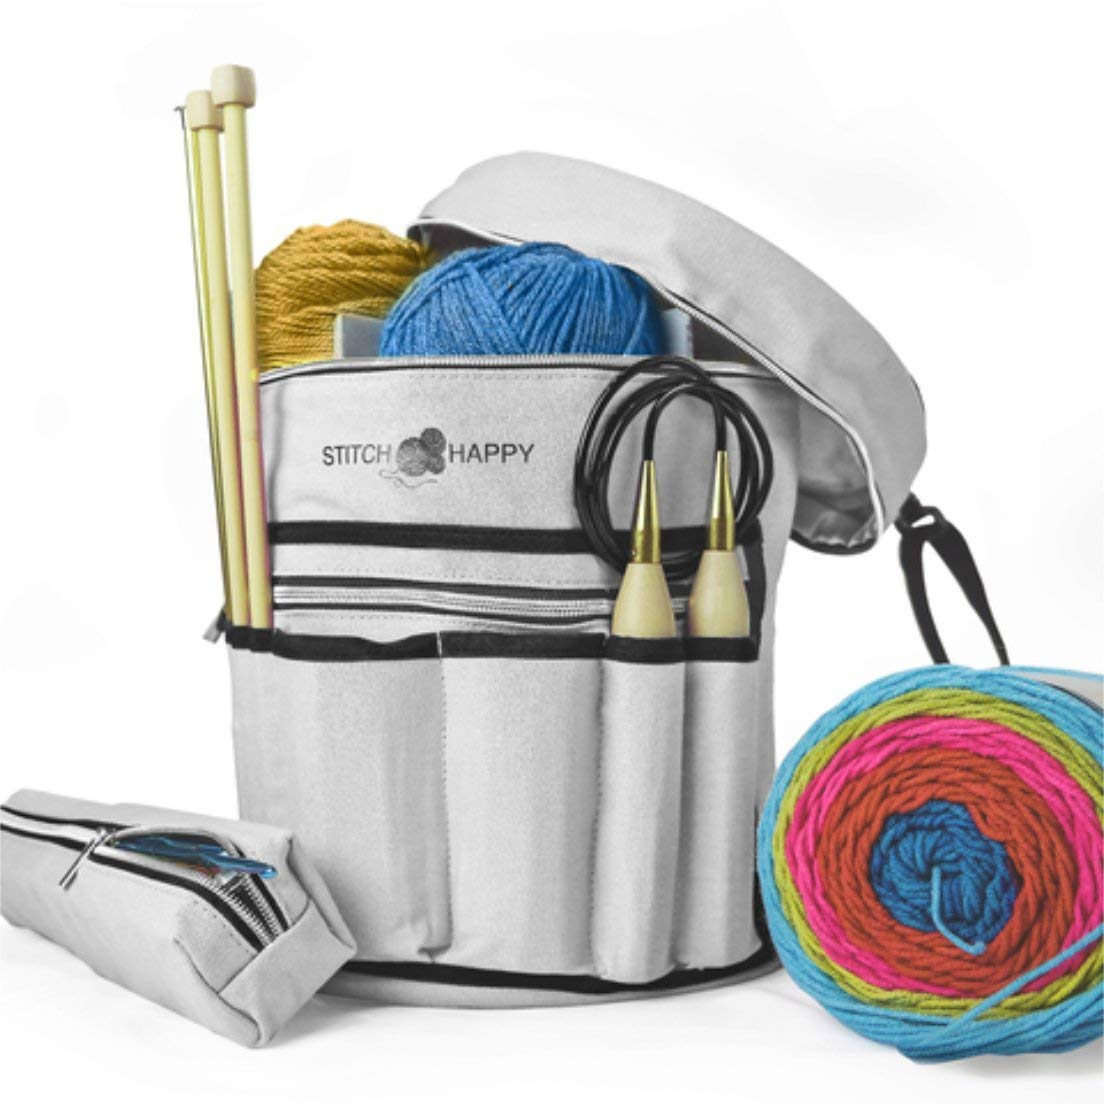 Portable Yarn Storage Knitting Tote Organizer Bag for Arts Crafts Needlework 8x5x4 Yarn Projects Knitting Yarn Bag Sewing 4 Hole Tote Bag for Knitting Projects